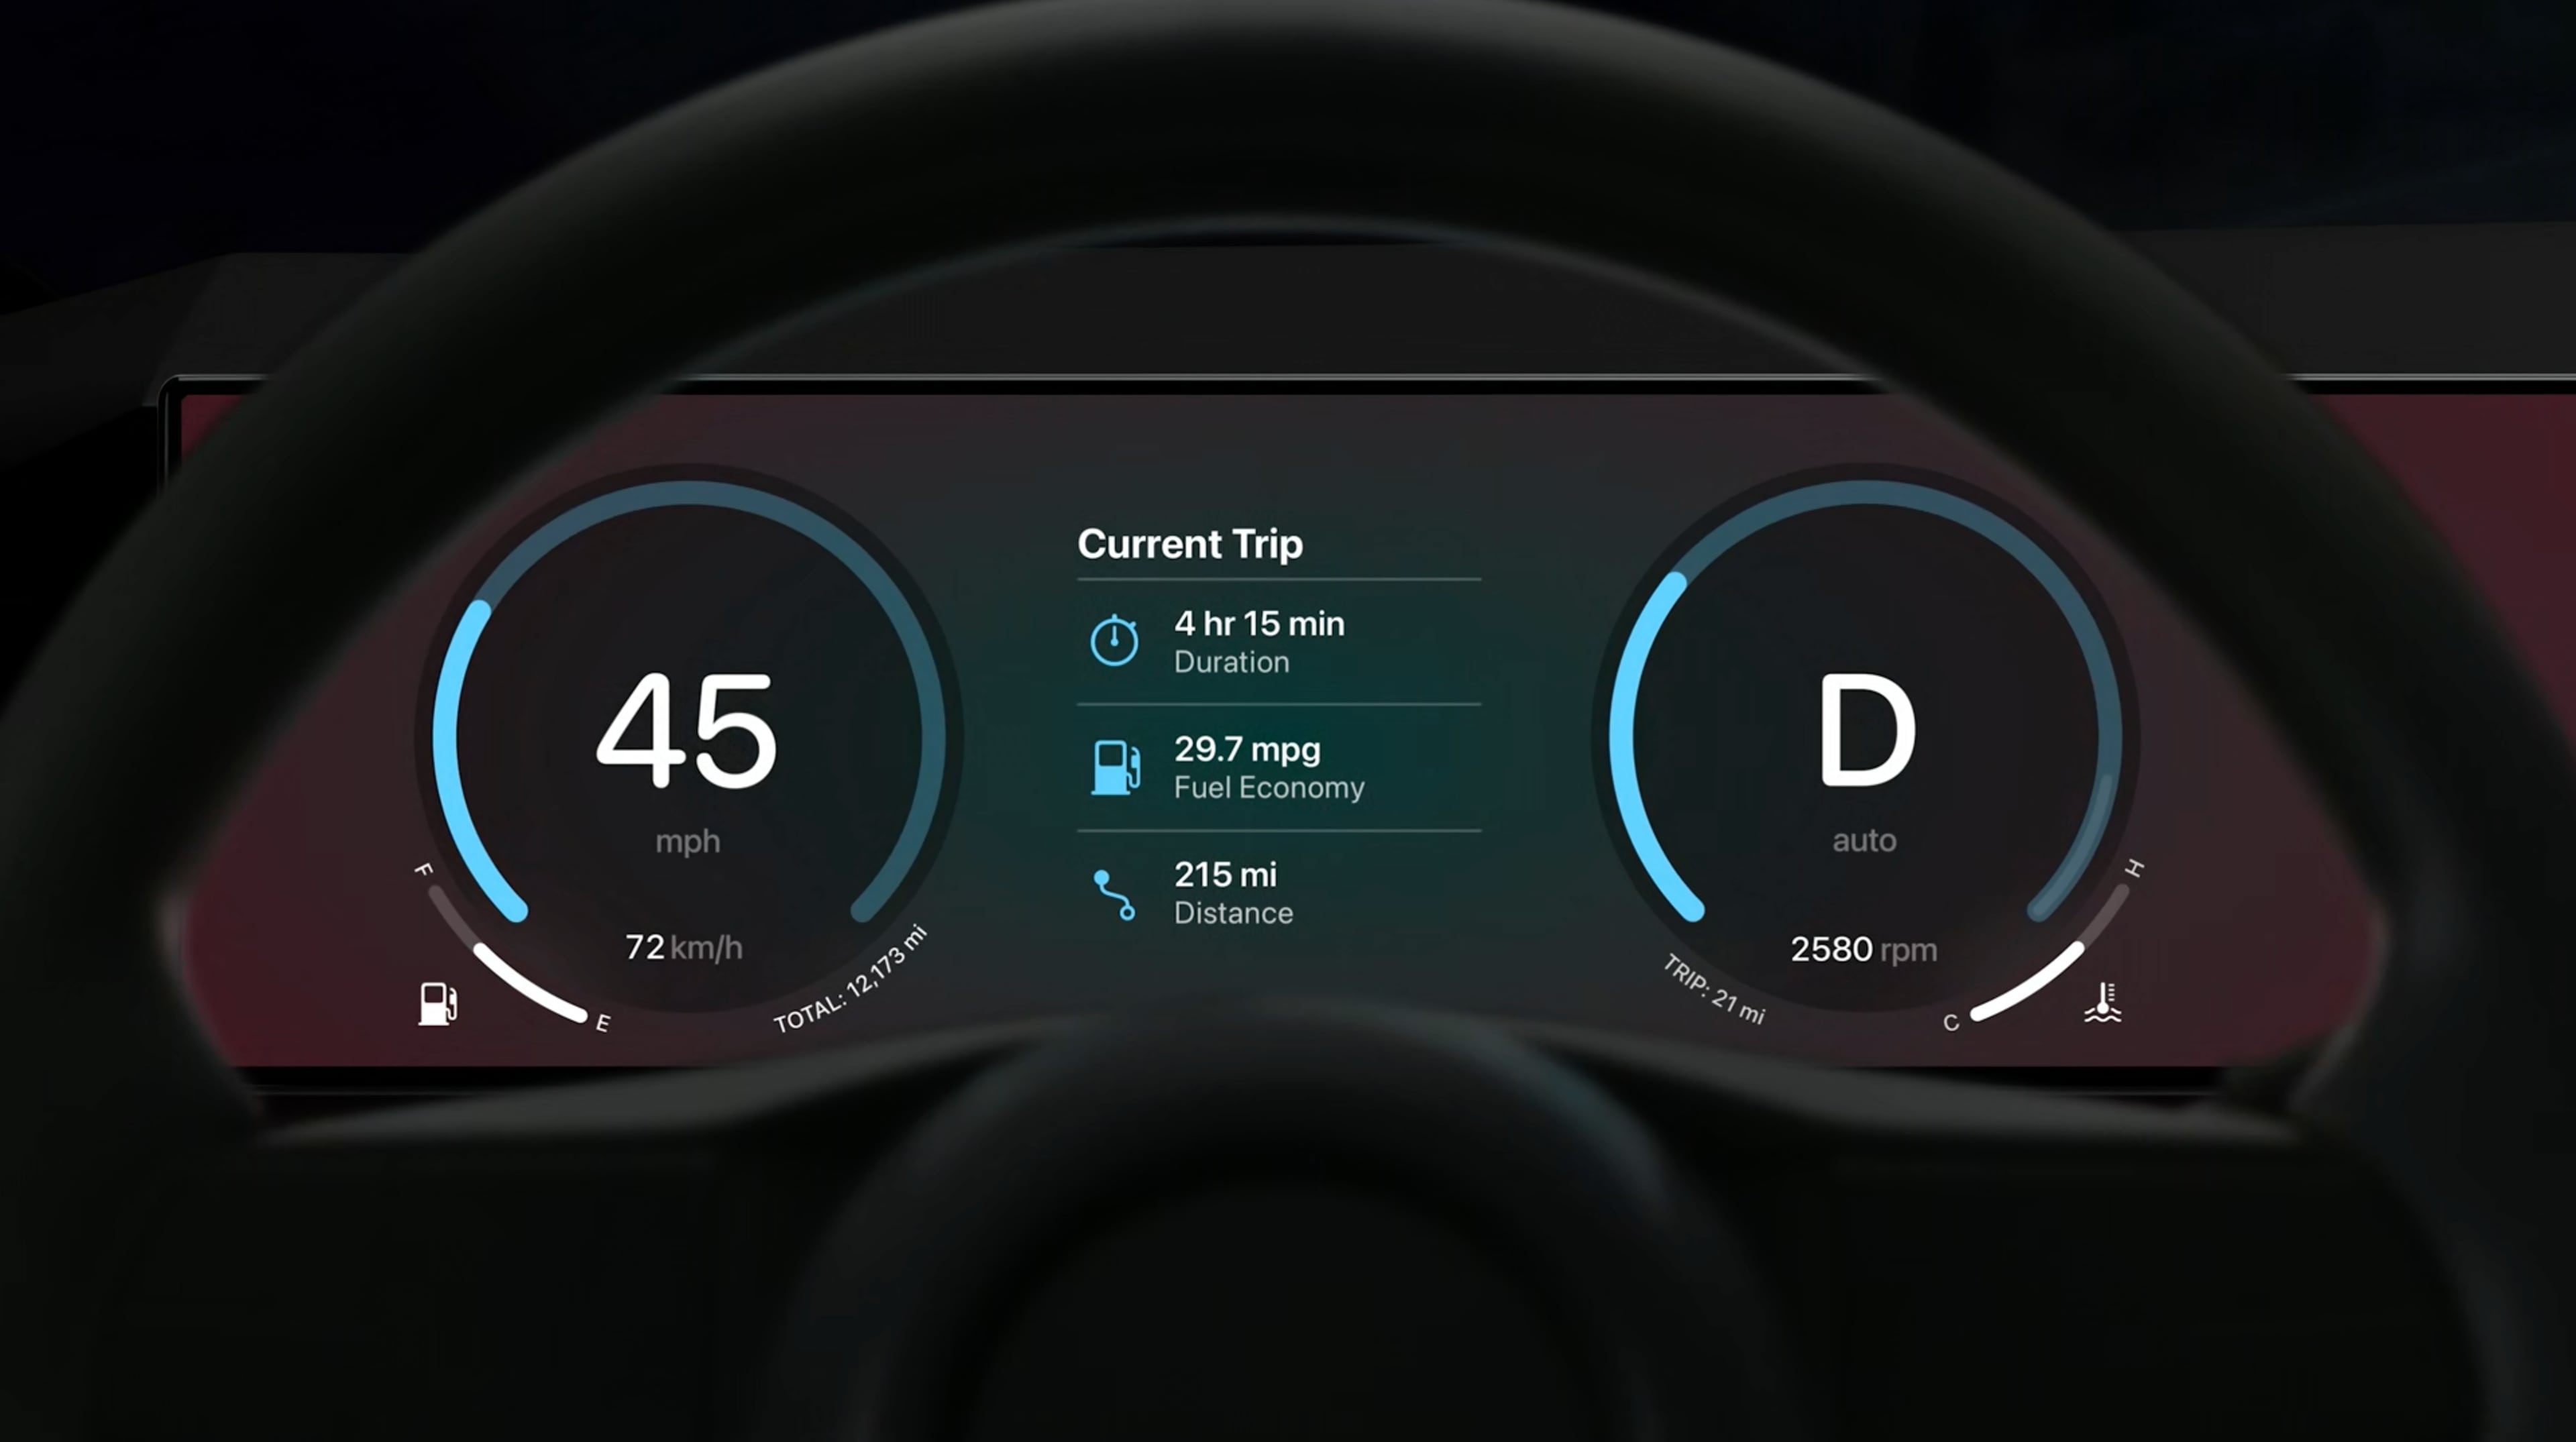 Traditional instrument cluster view with trip information in the centre in CarPlay